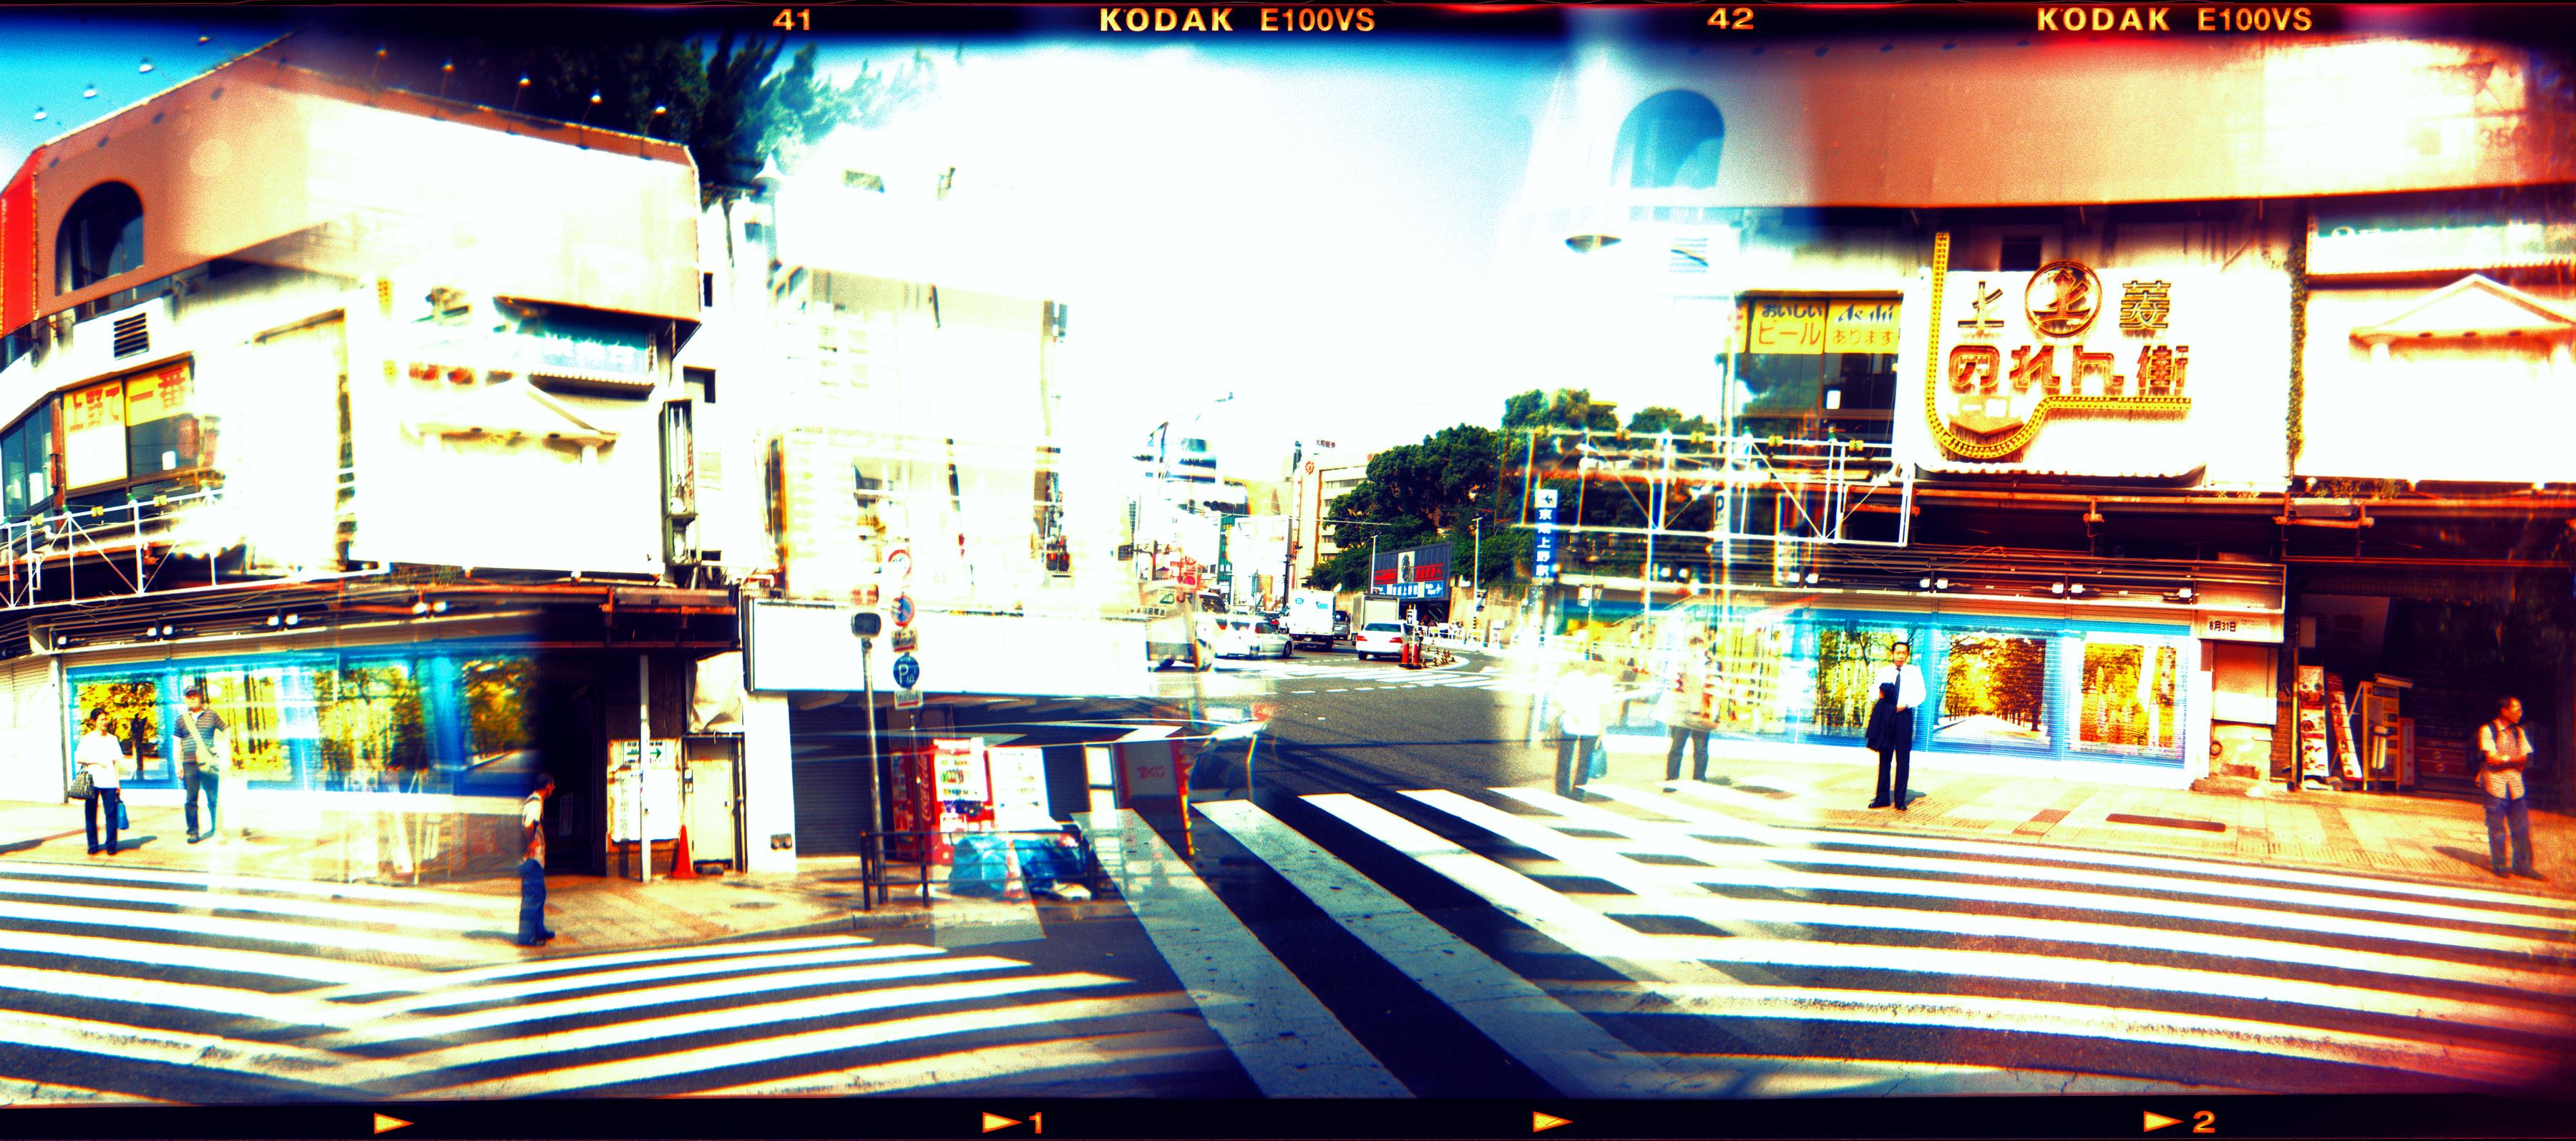 Hugo Garcia-Urrutia Landscape Photograph - "Tokyo Crossing" contemporary and exotic, cross-processed photography on paper